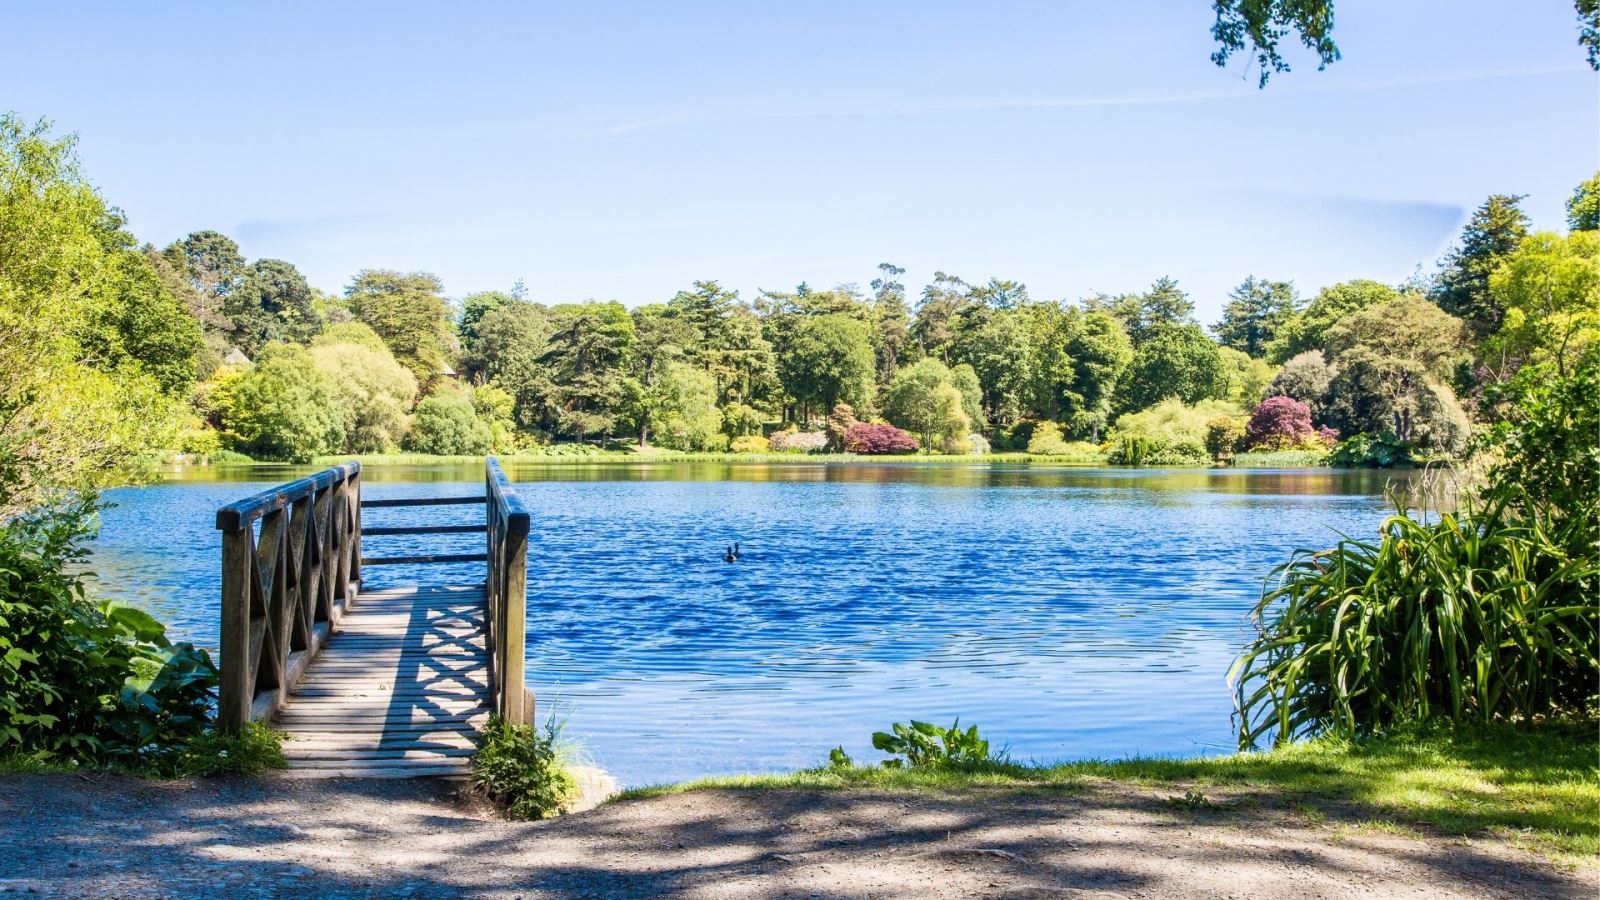 An image of the little wooden pedestrian jetty and Mount Stewart lake on a bright sunny day